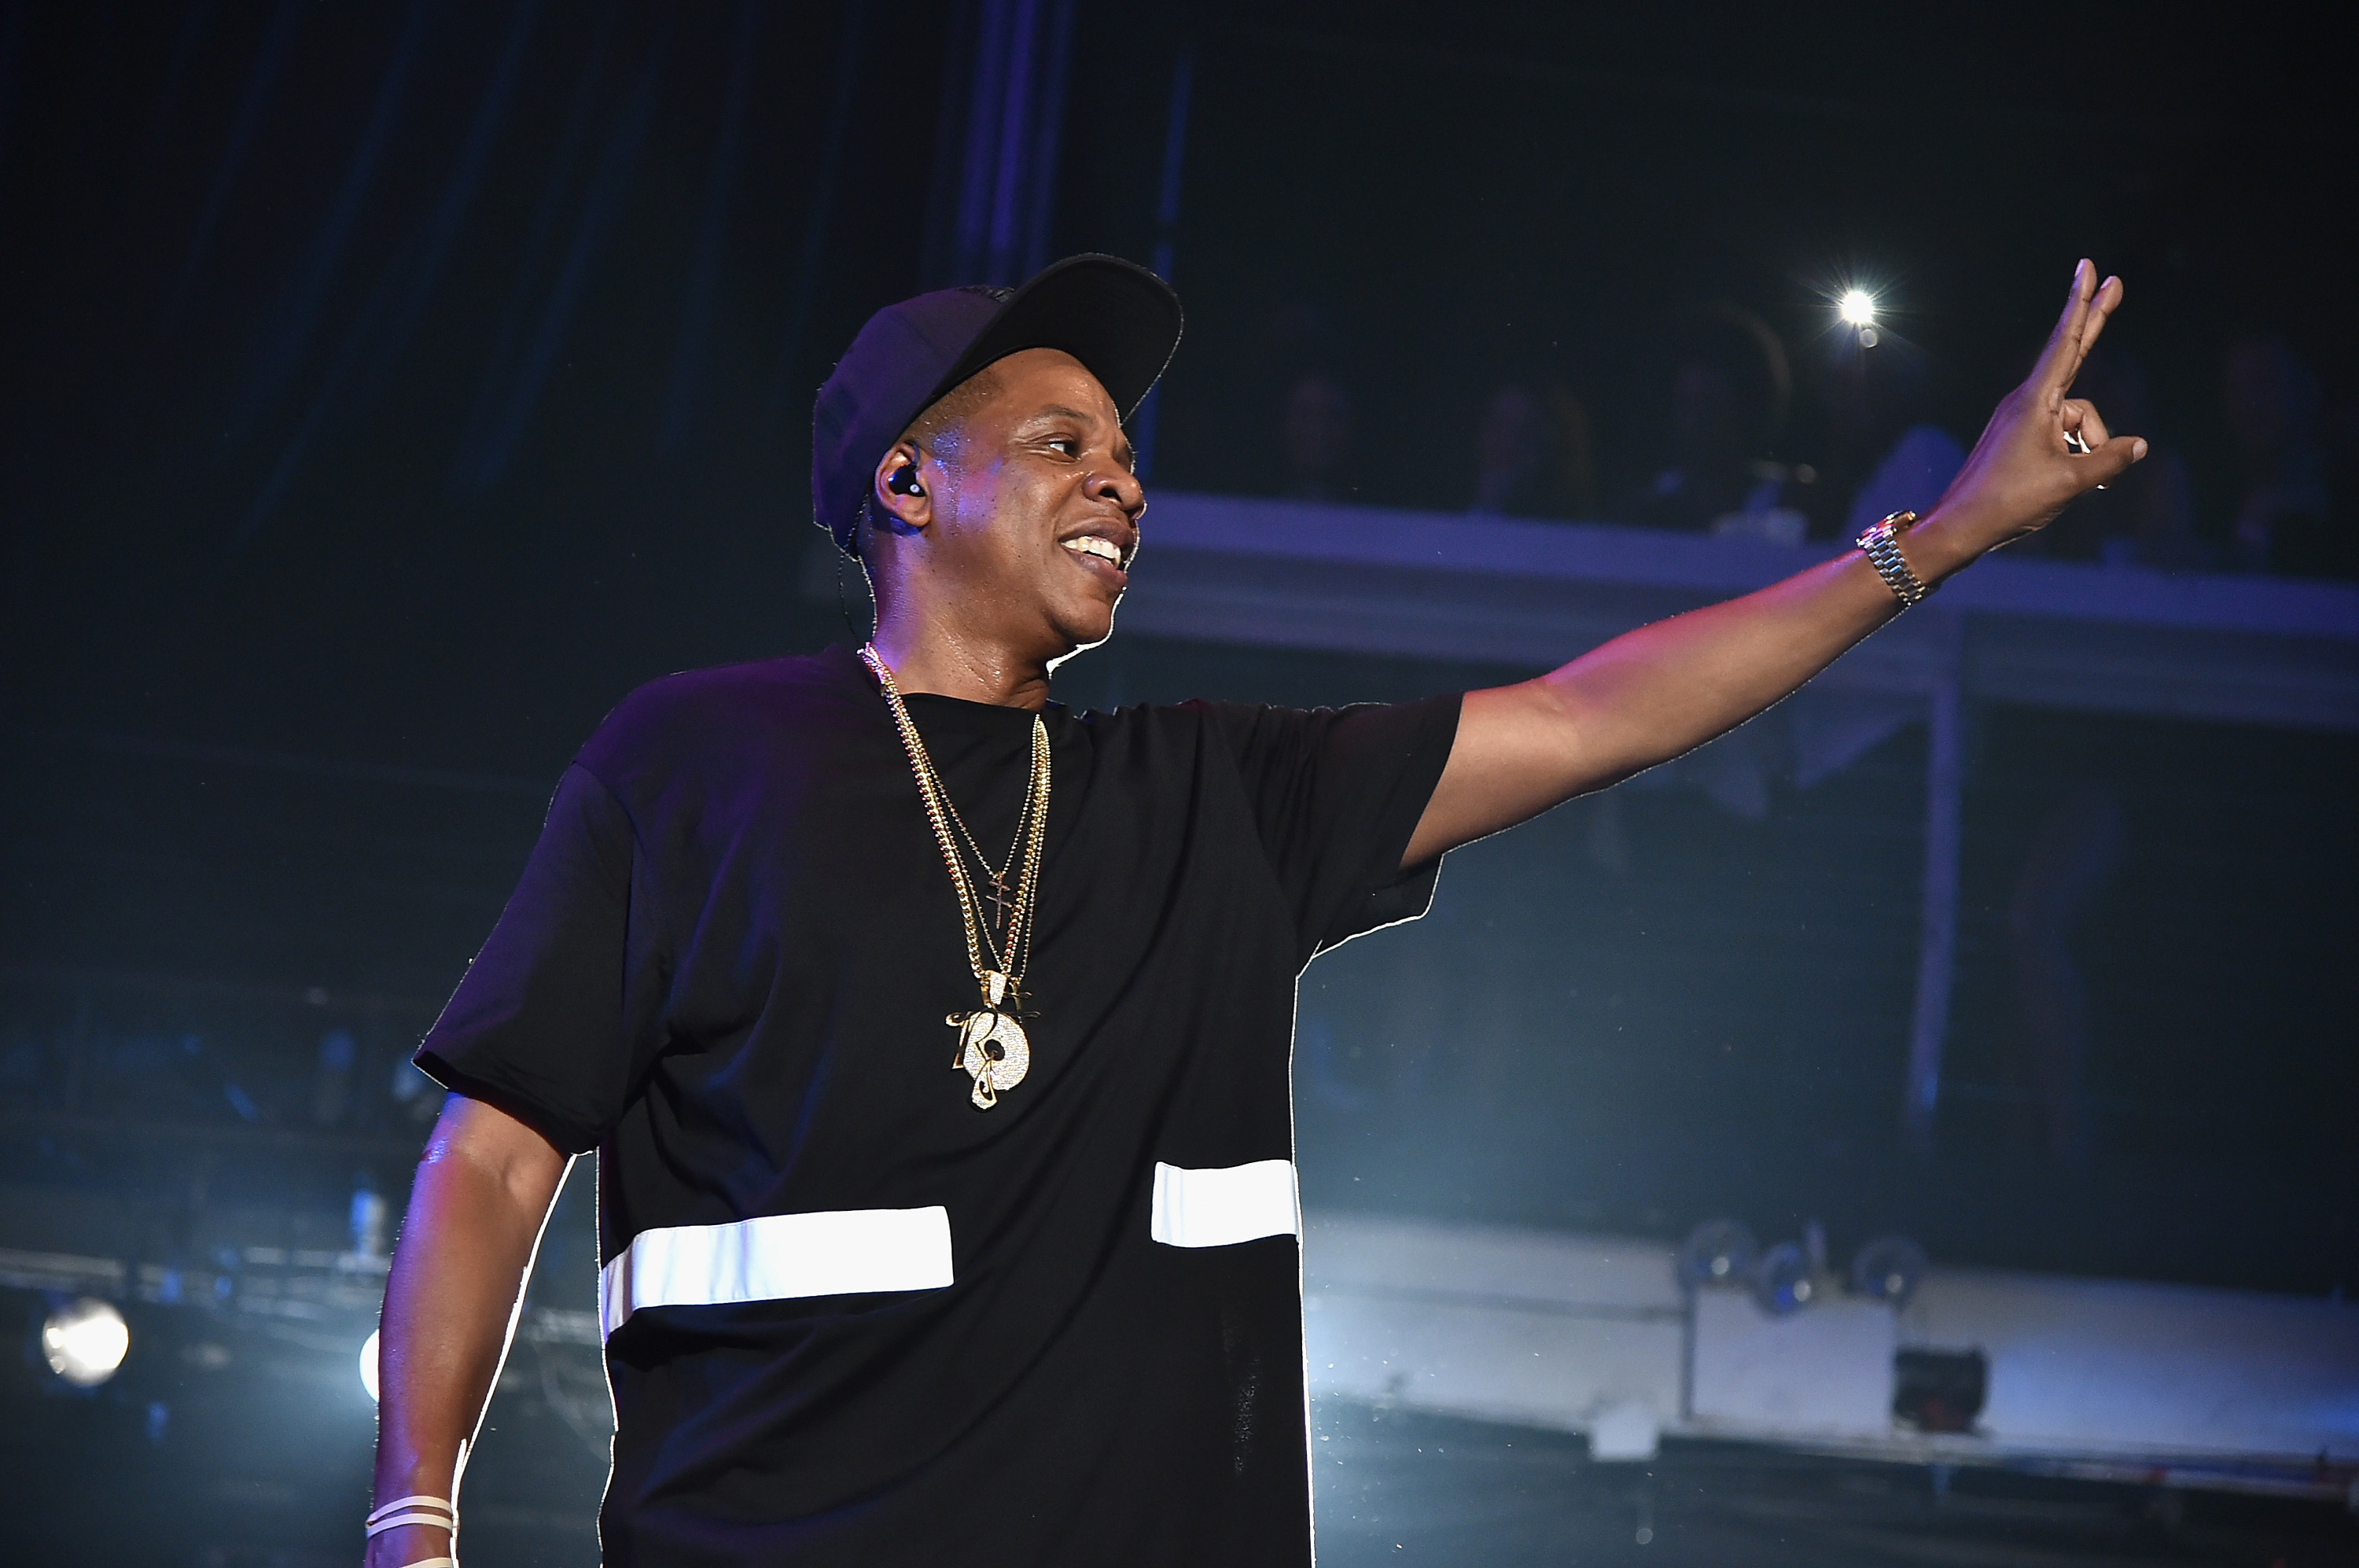 Jay-Z performs during TIDAL X: Jay-Z B-sides in NYC on May 17, 2015. (Theo Wargo—Getty Images/Live Nation)